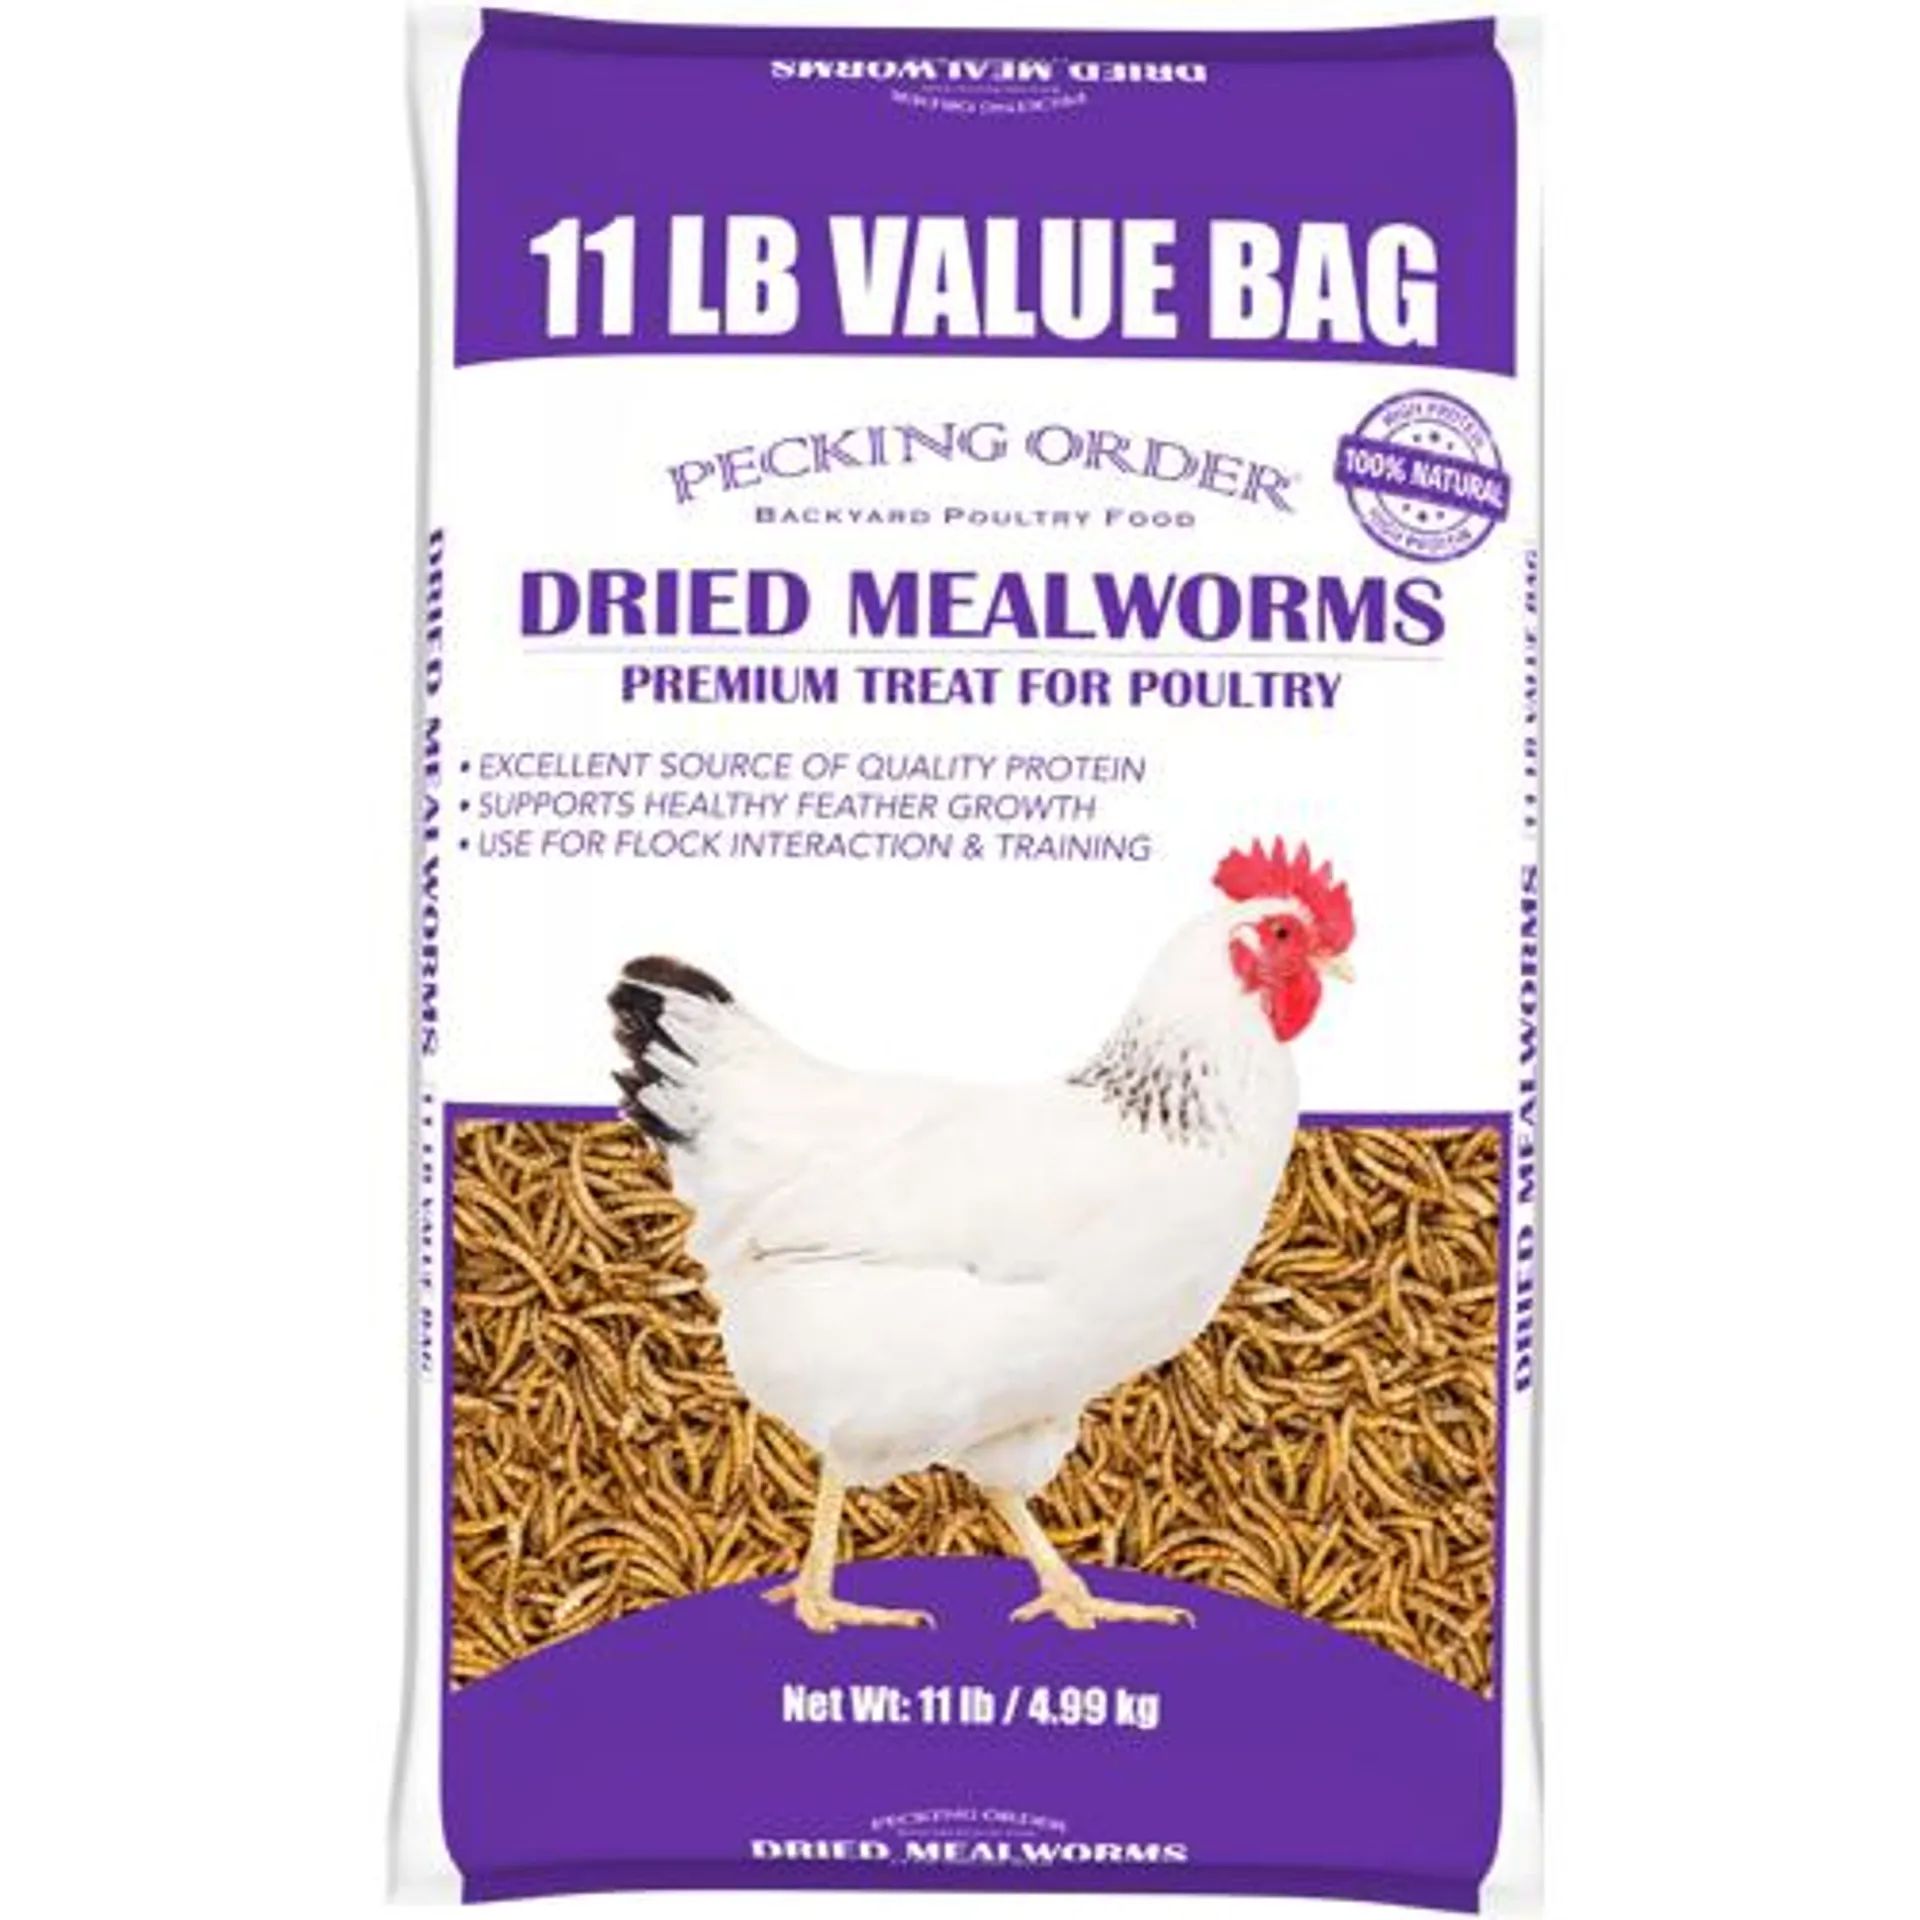 Pecking Order Dried Mealworm, 11lbs